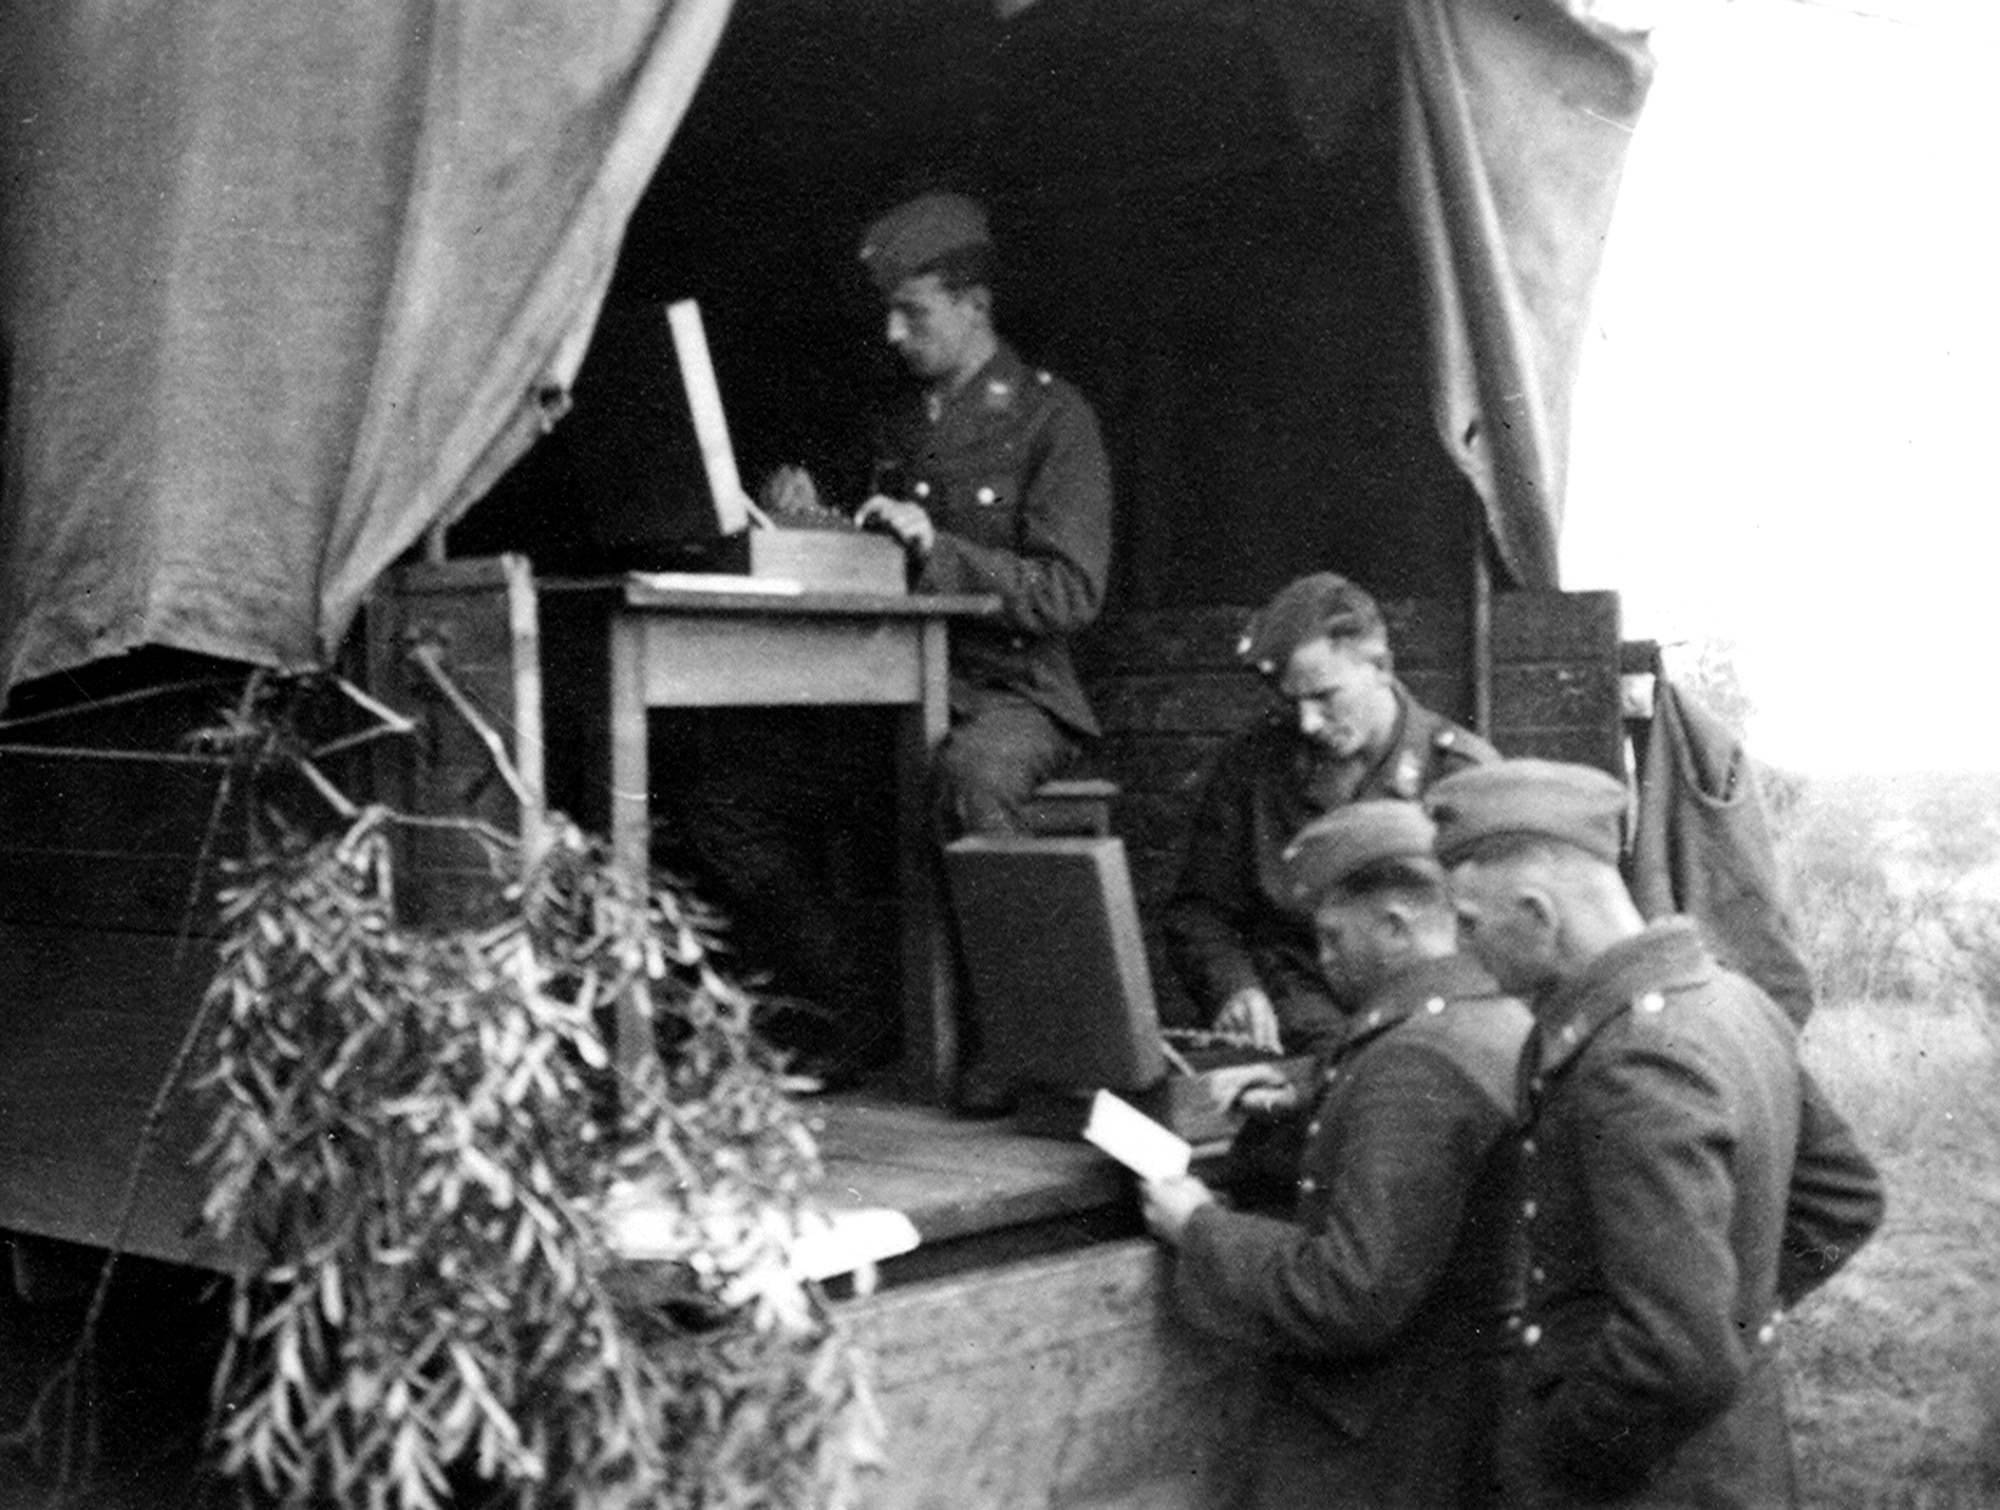 These Luftwaffe personnel are using two Enigma machines, probably to encrypt and decrypt at once. (Photo courtesy of Helge Fykse, Norway)